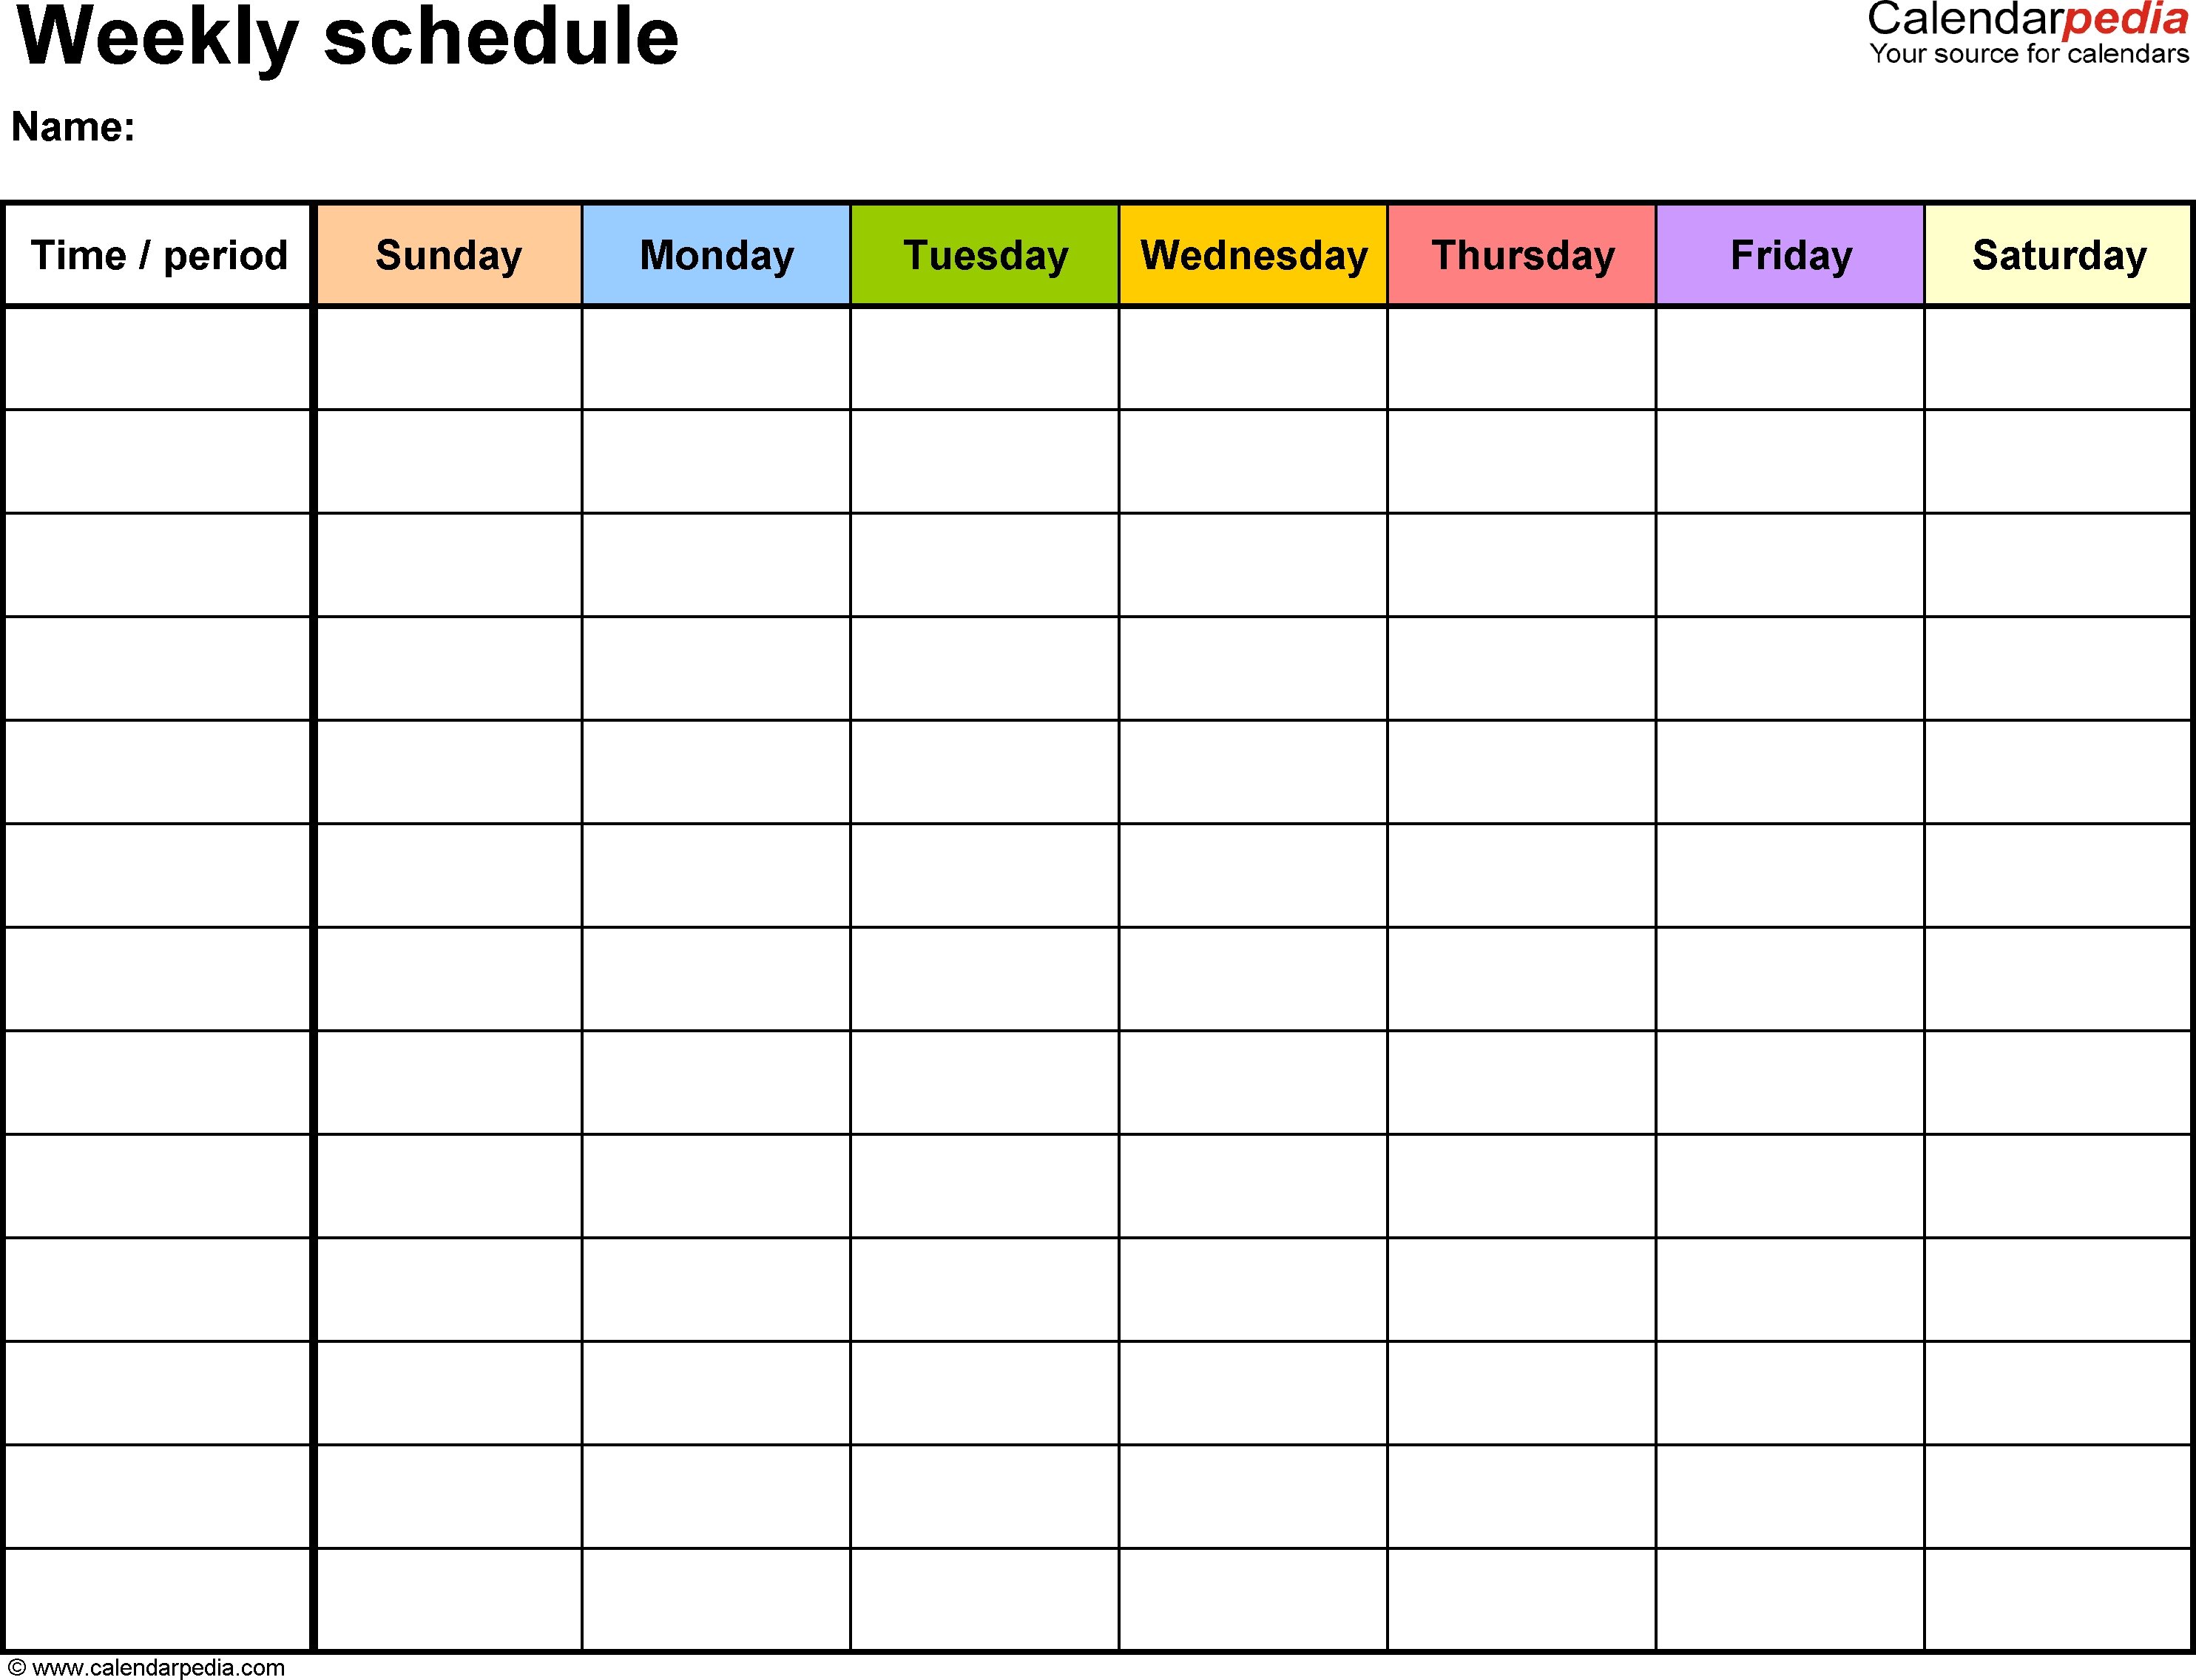 Free Weekly Schedule Templates For Word - 18 Templates Monday To Sunday Calendar To Fiull In